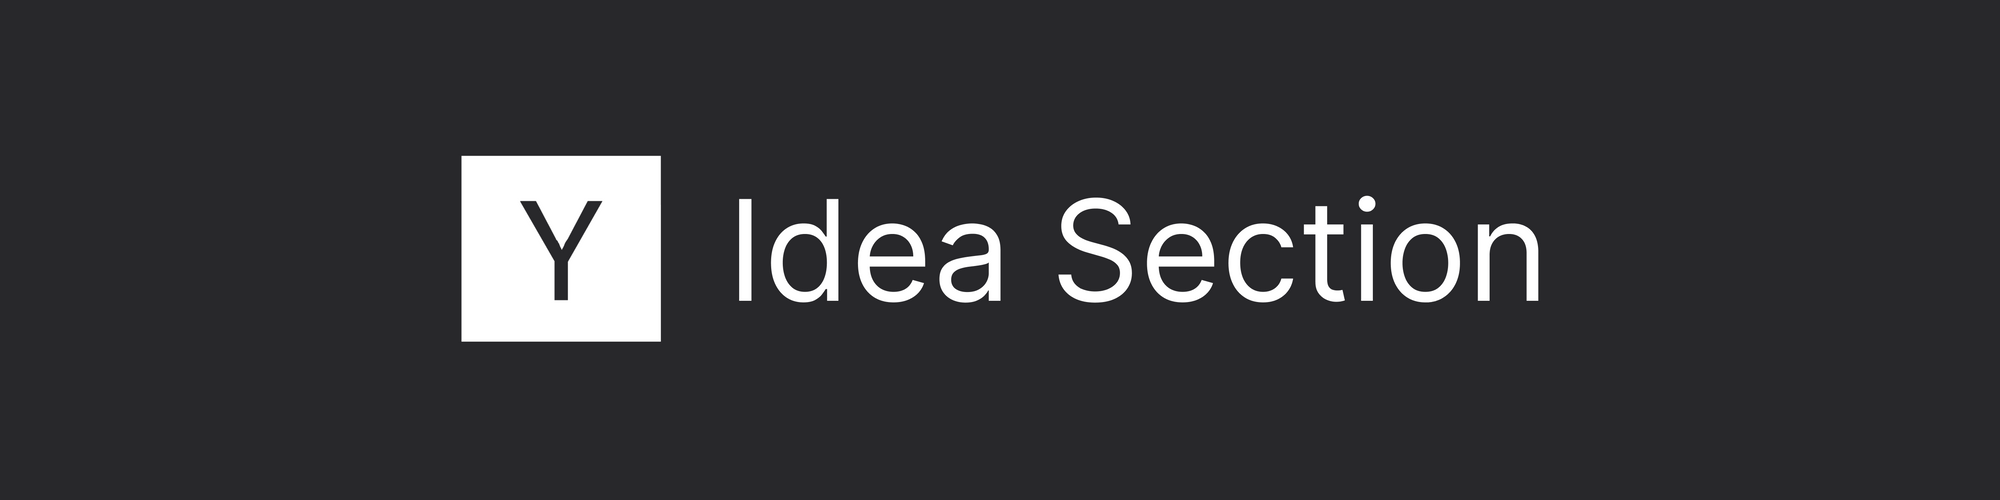 White on black banner graphic that states the section heading: Idea Section. This references the corresponding section of the Y Combinator application.